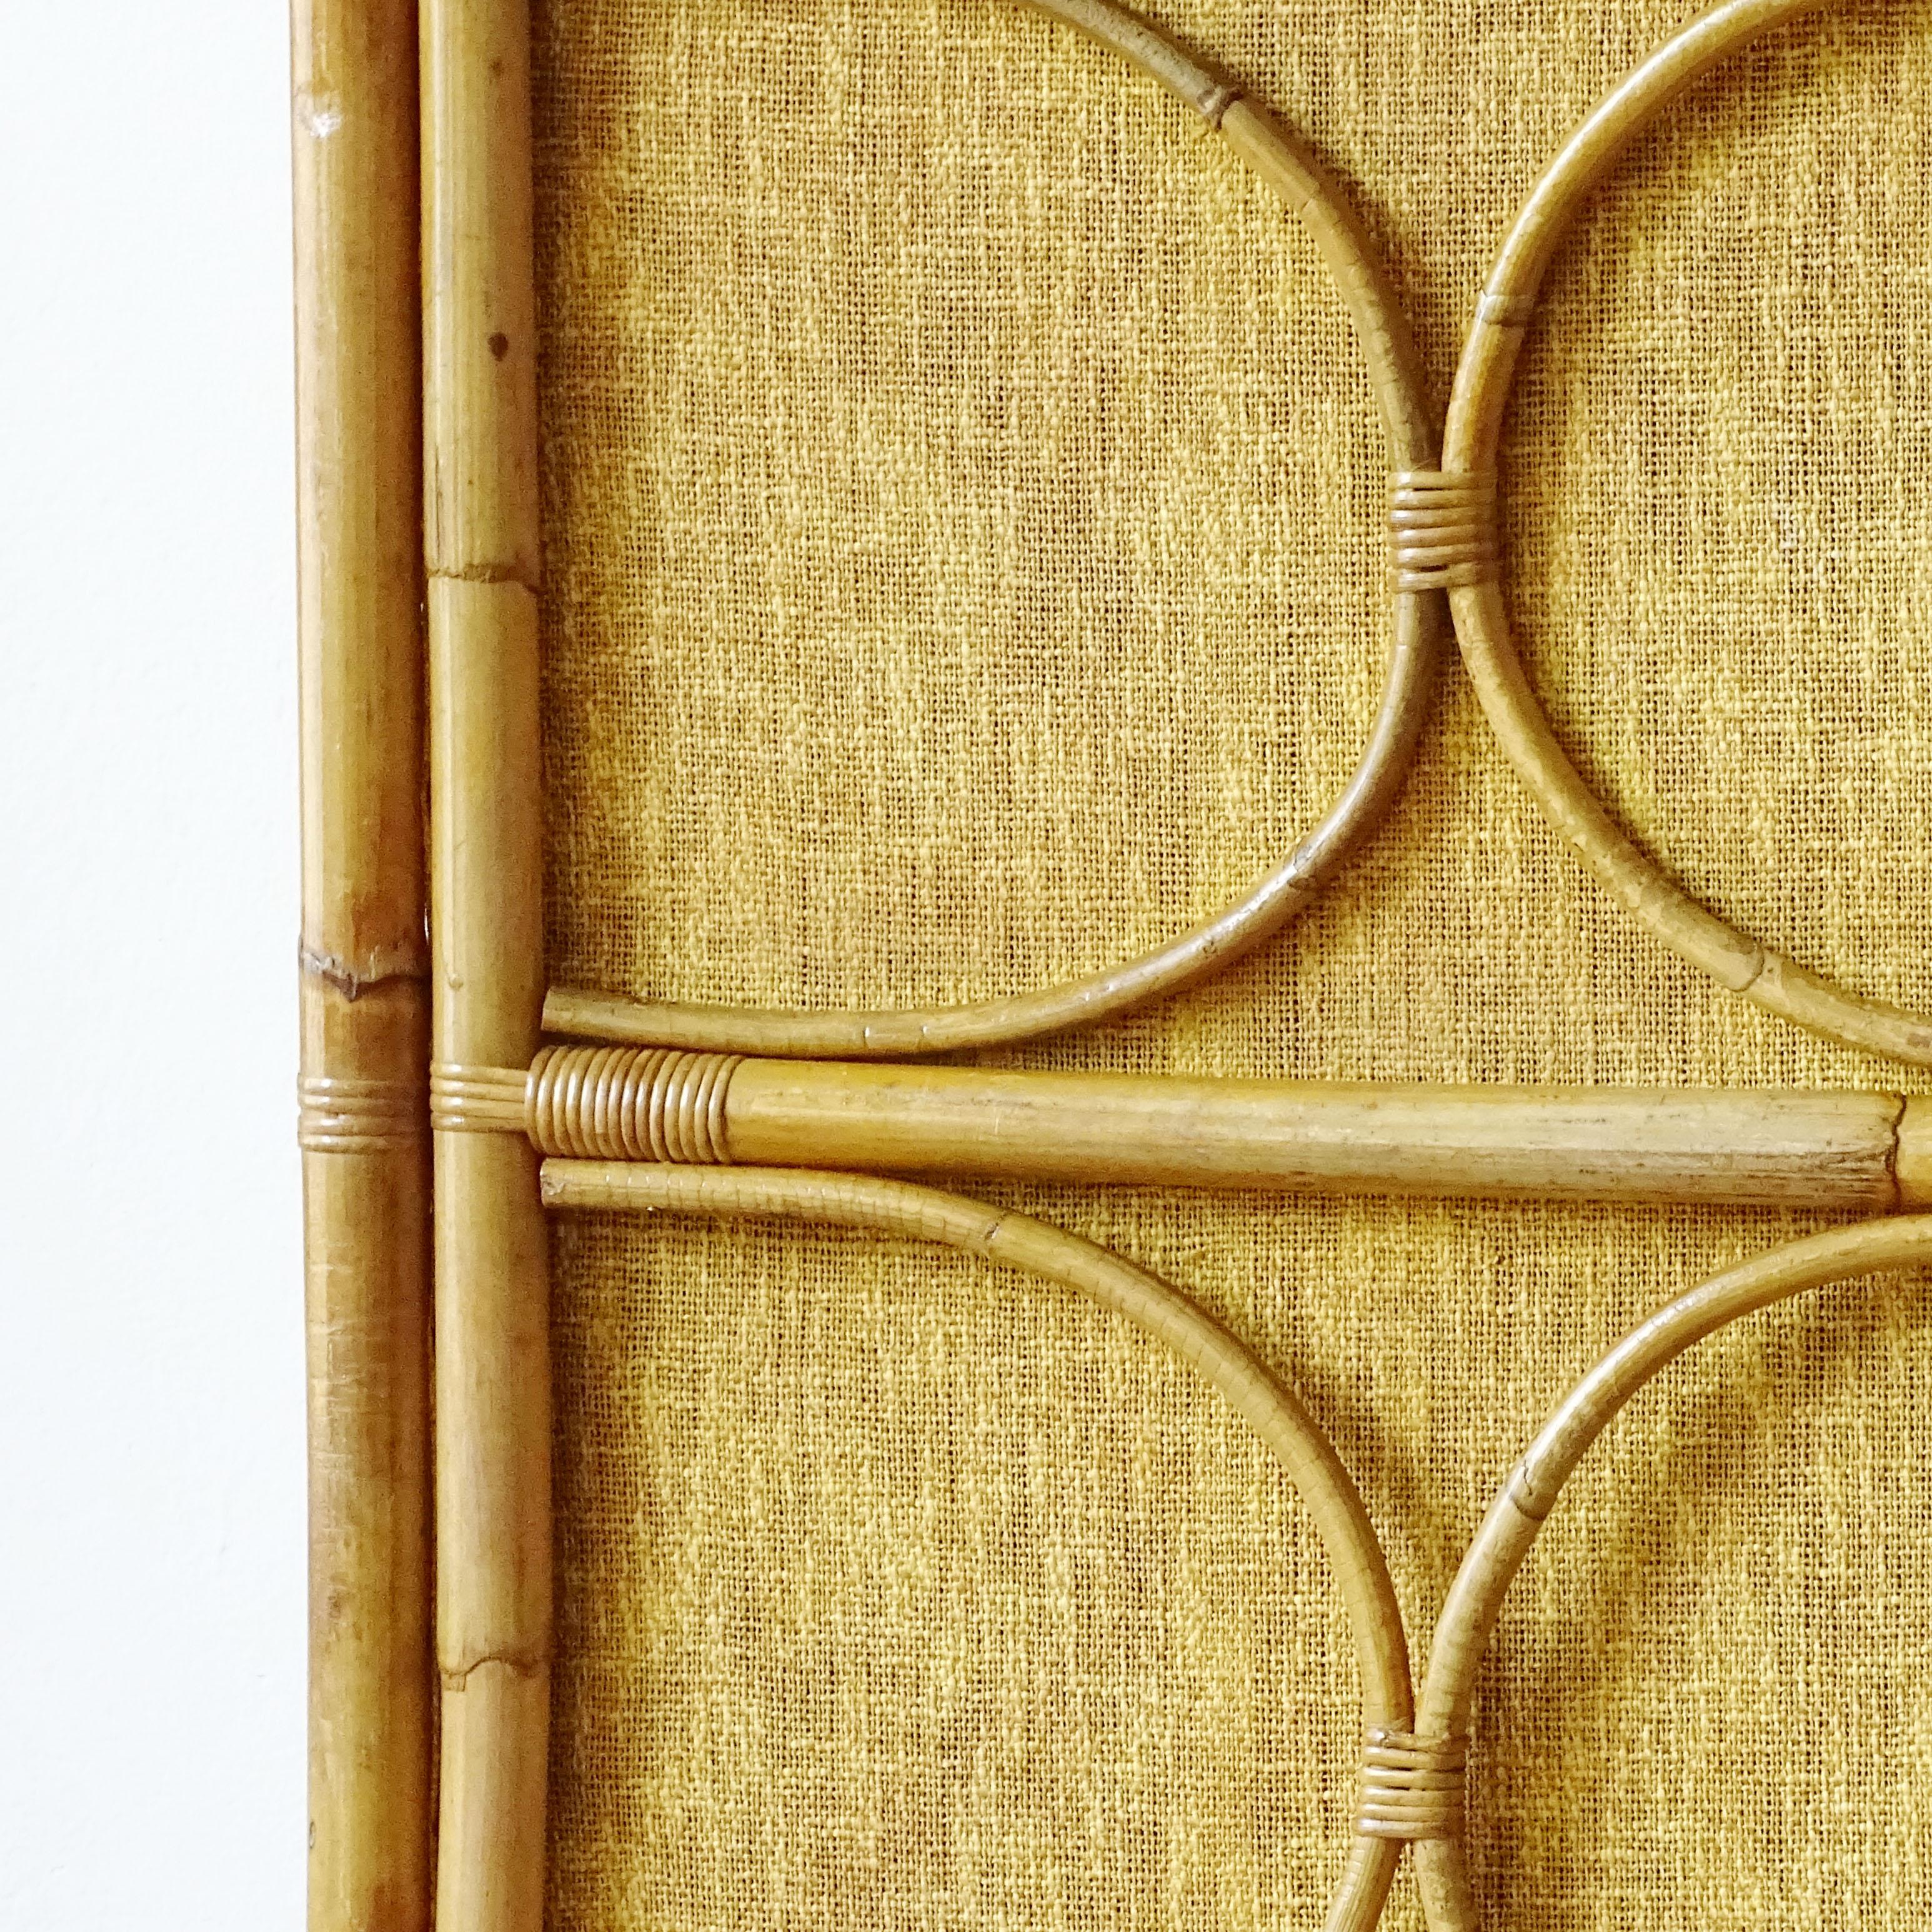 Splendid Italian 1950s bamboo and wicker wardrobe with its original mustard fabric.
An authentic Dolce Vita item to own.